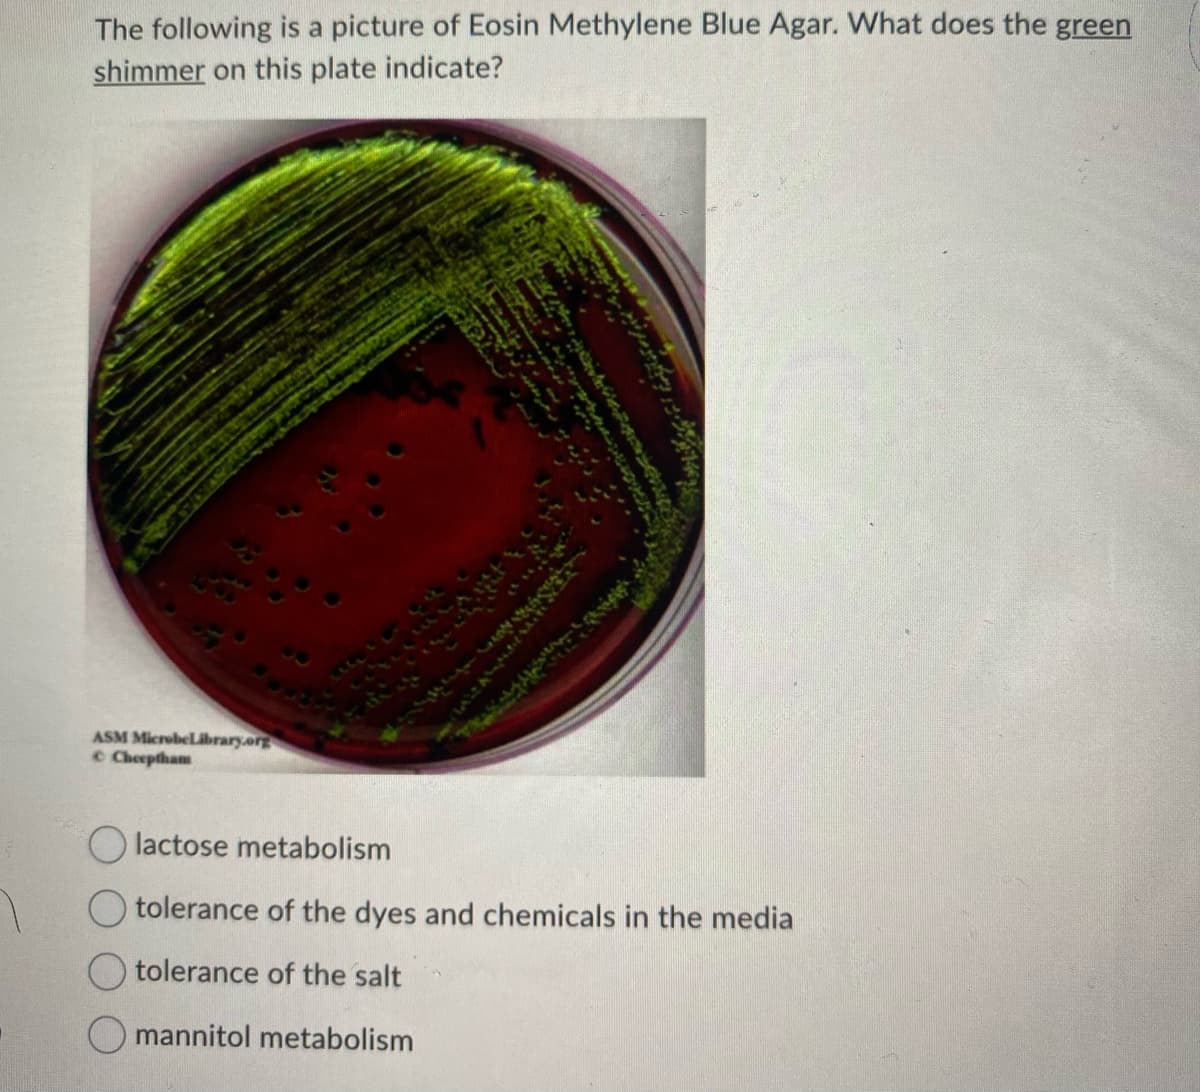 The following is a picture of Eosin Methylene Blue Agar. What does the green
shimmer on this plate indicate?
ASM MicrobeLibrary.org
© Cheeptham
CON
LASZAMSAL
lactose metabolism
Otolerance of the dyes and chemicals in the media
tolerance of the salt
mannitol metabolism